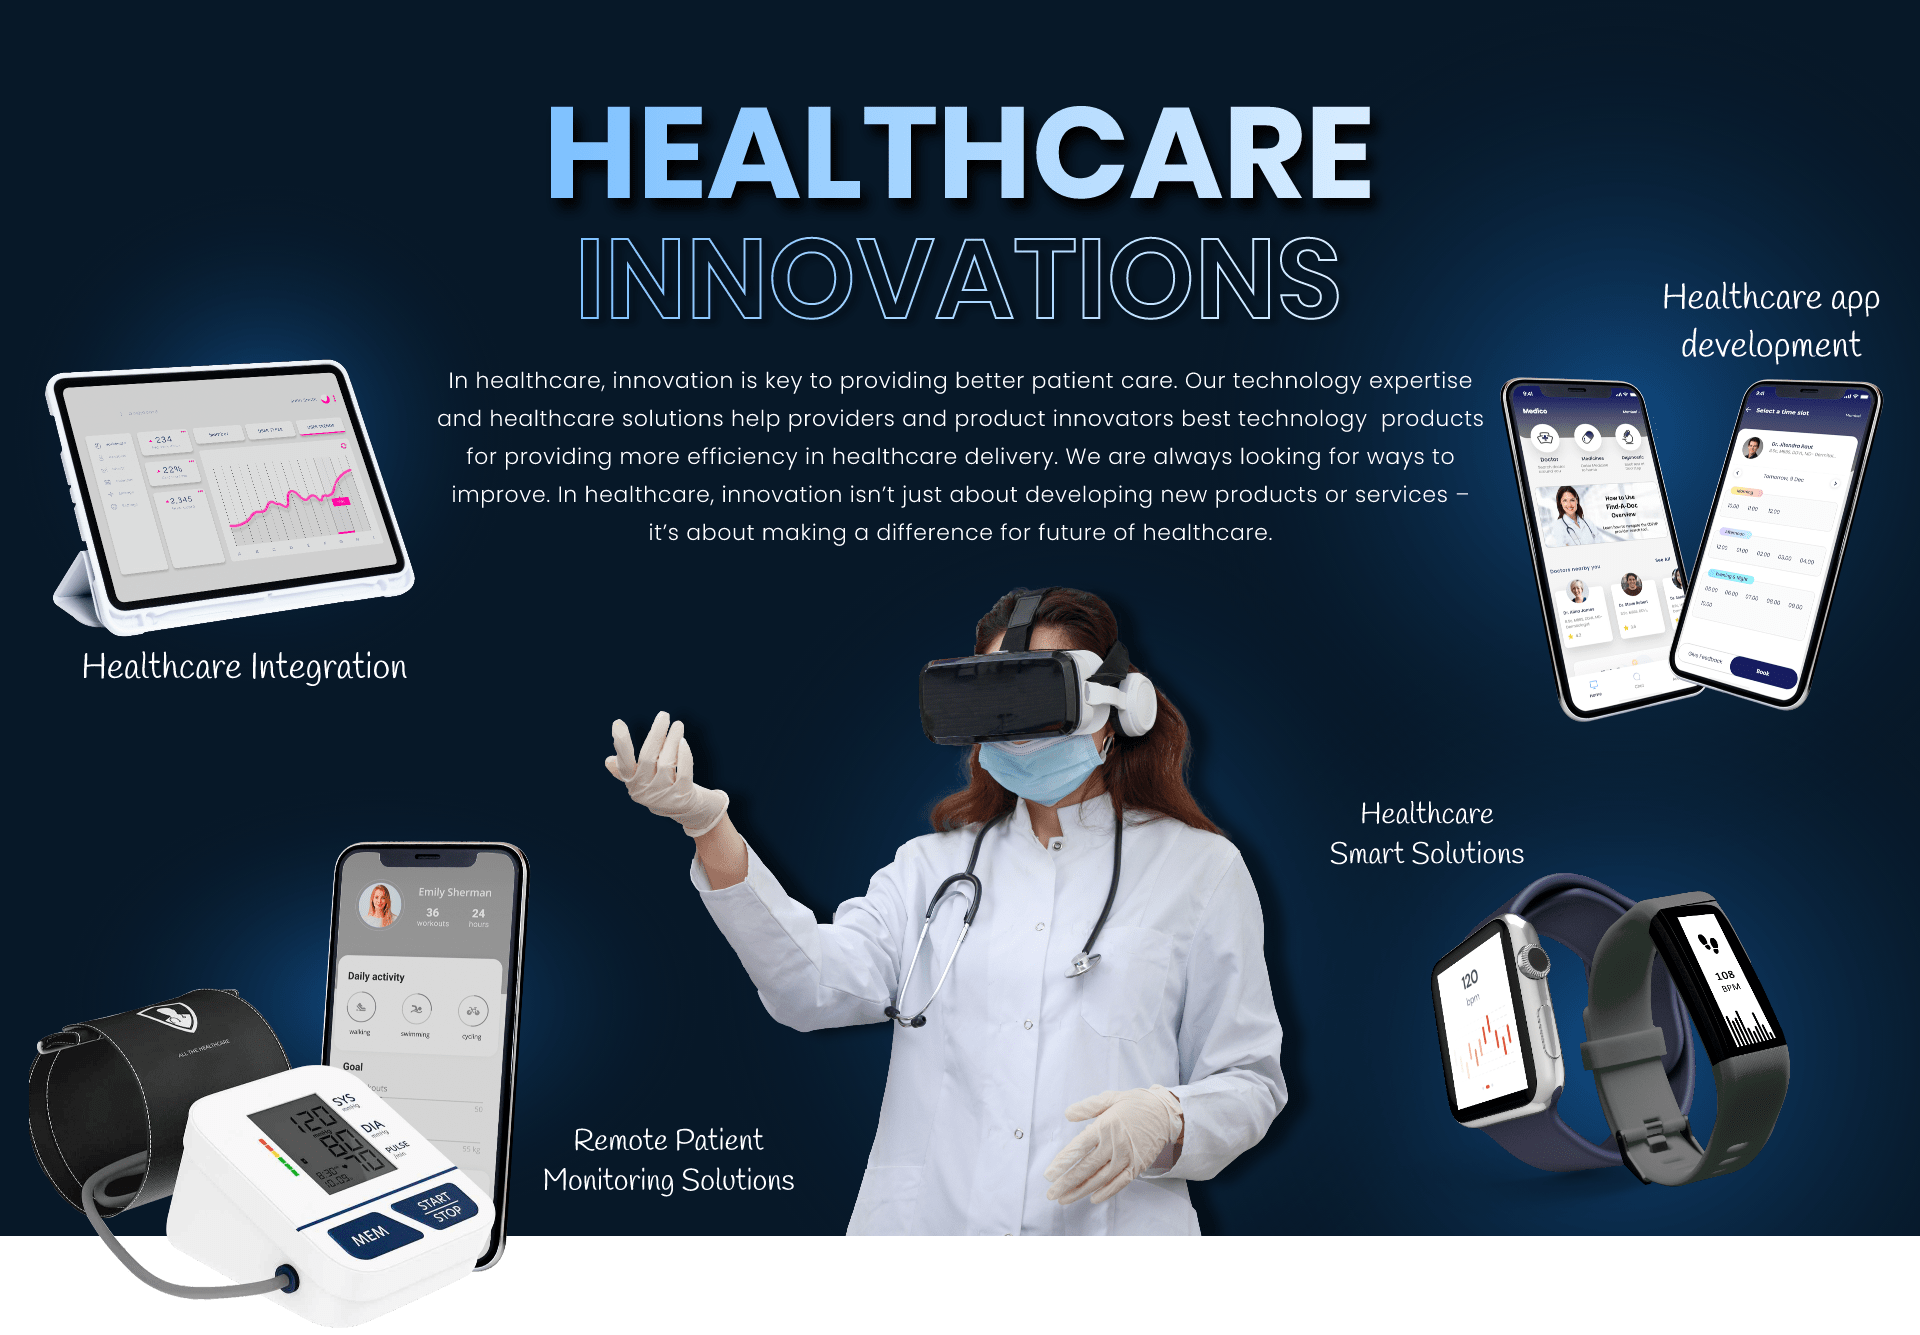 Healthcare Innovations